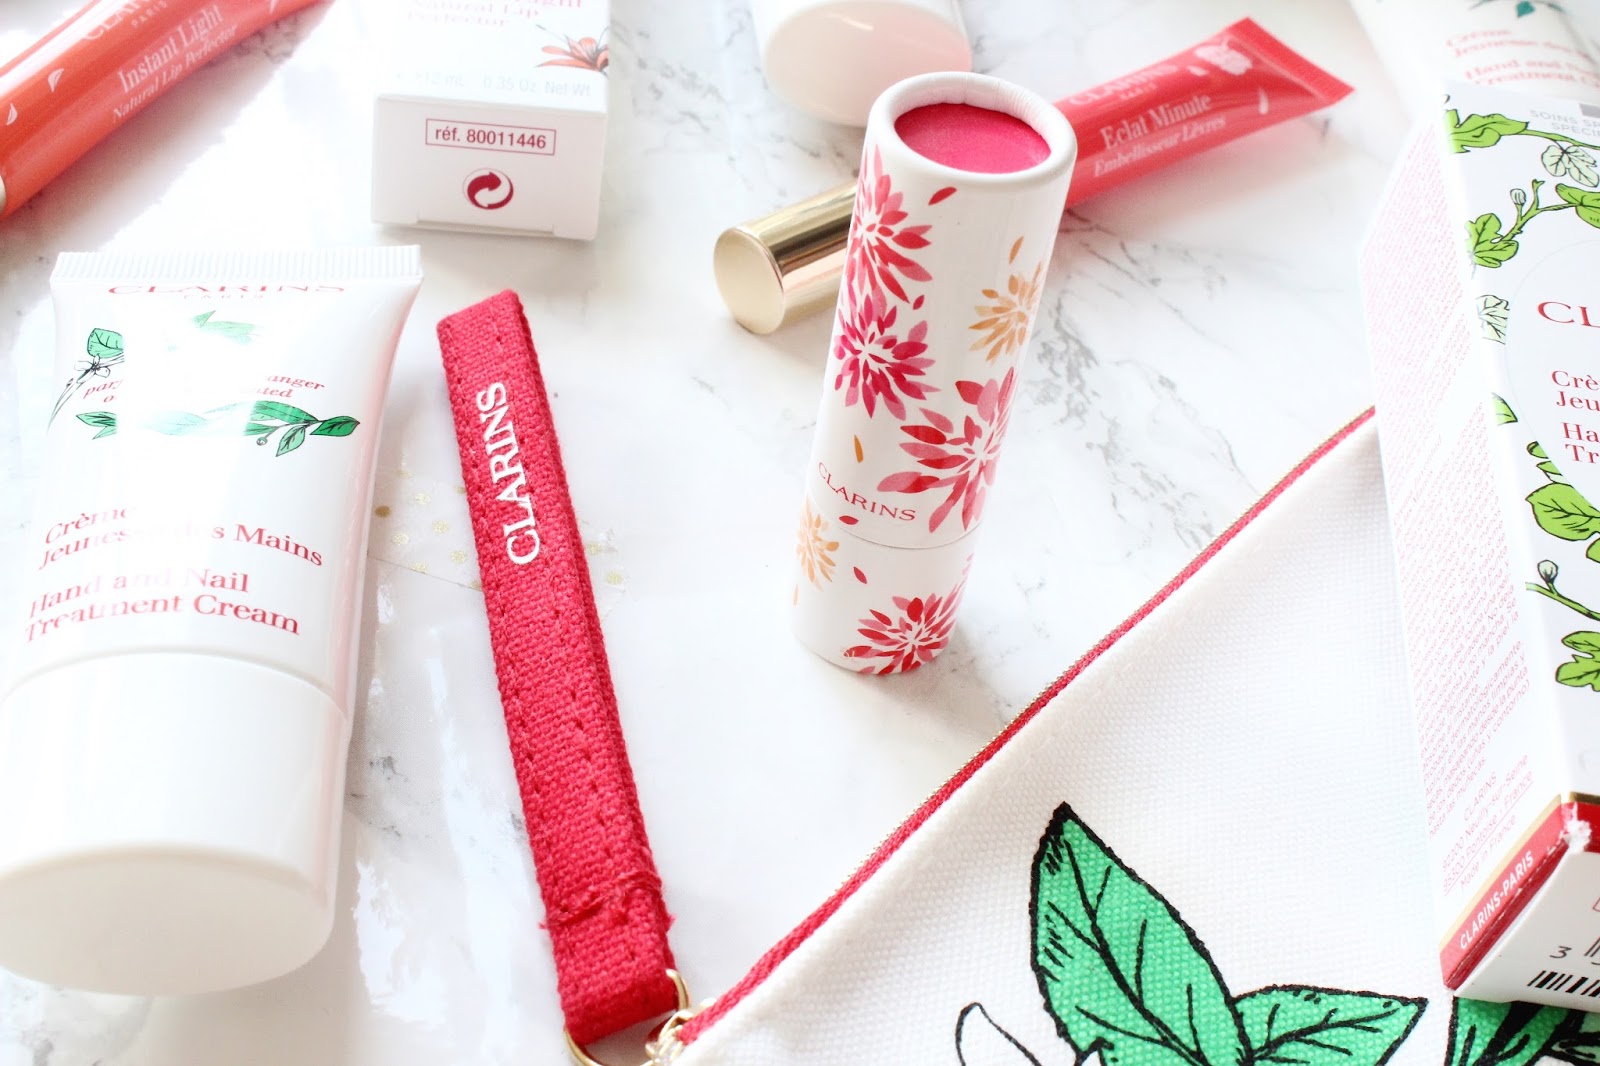 Clarins Limited Edition Collection